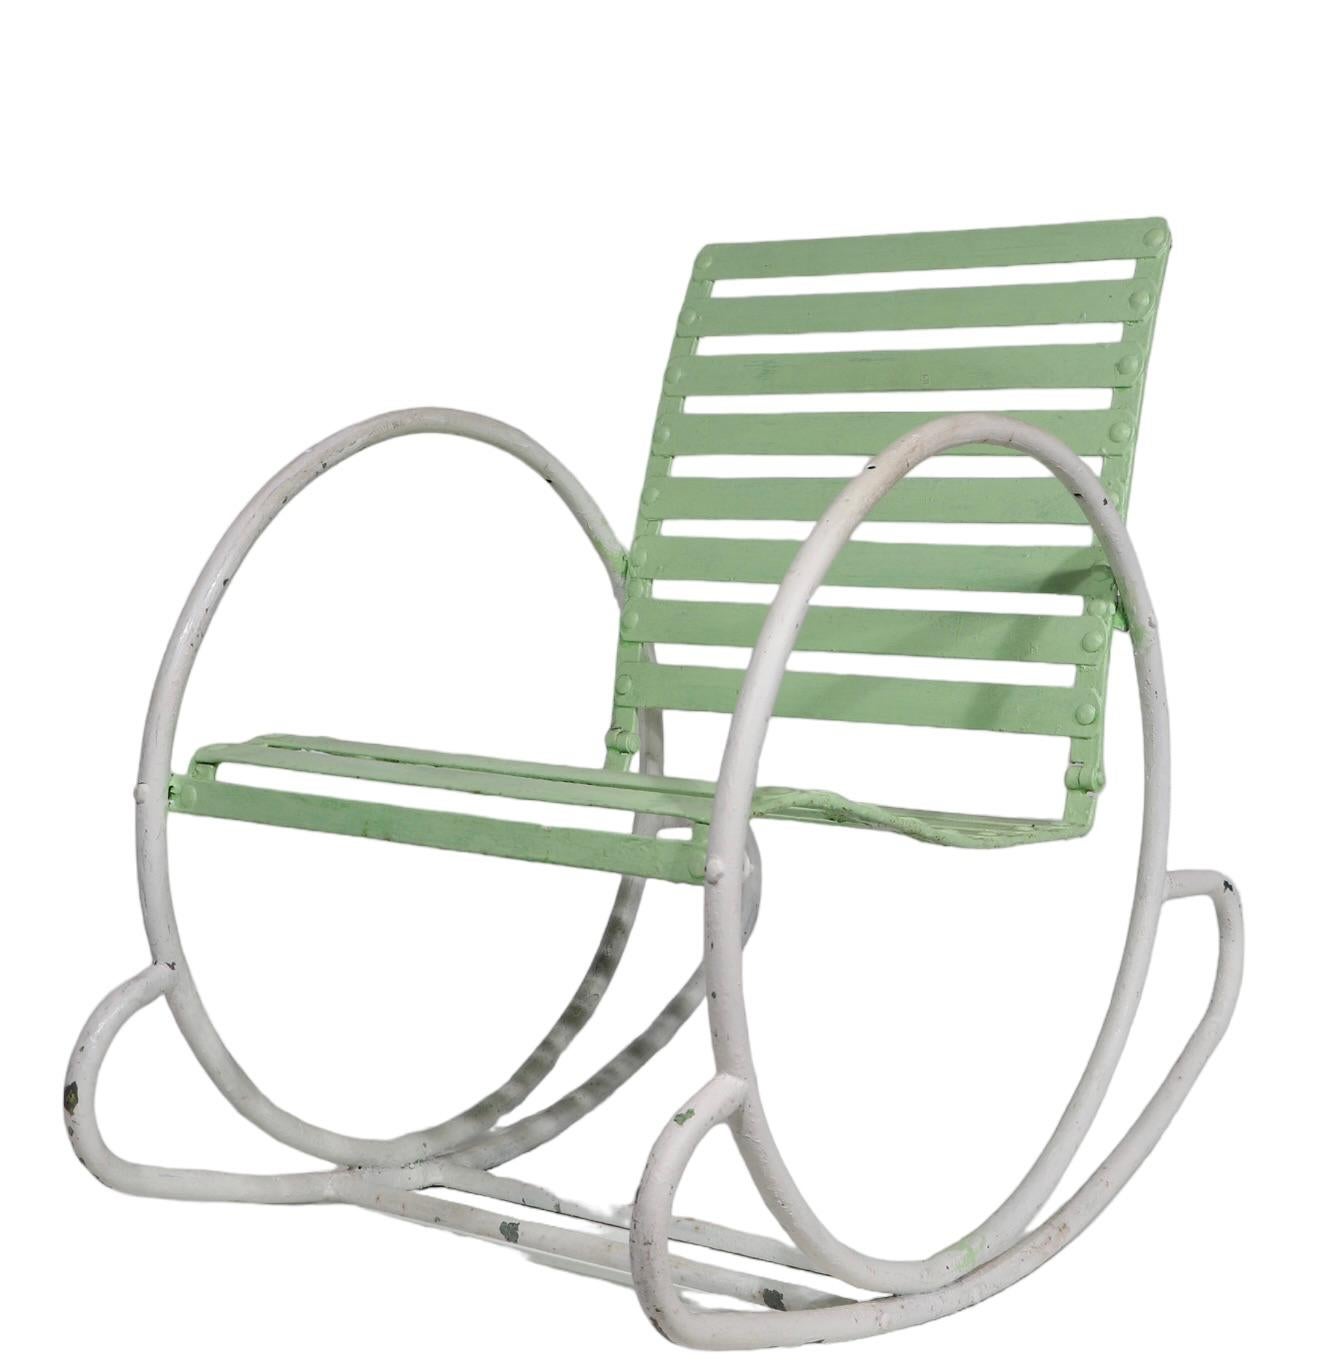 American Art Deco Iron and Steel Garden Patio Poolside  Hoop Frame Rocking Chair c 1930's For Sale